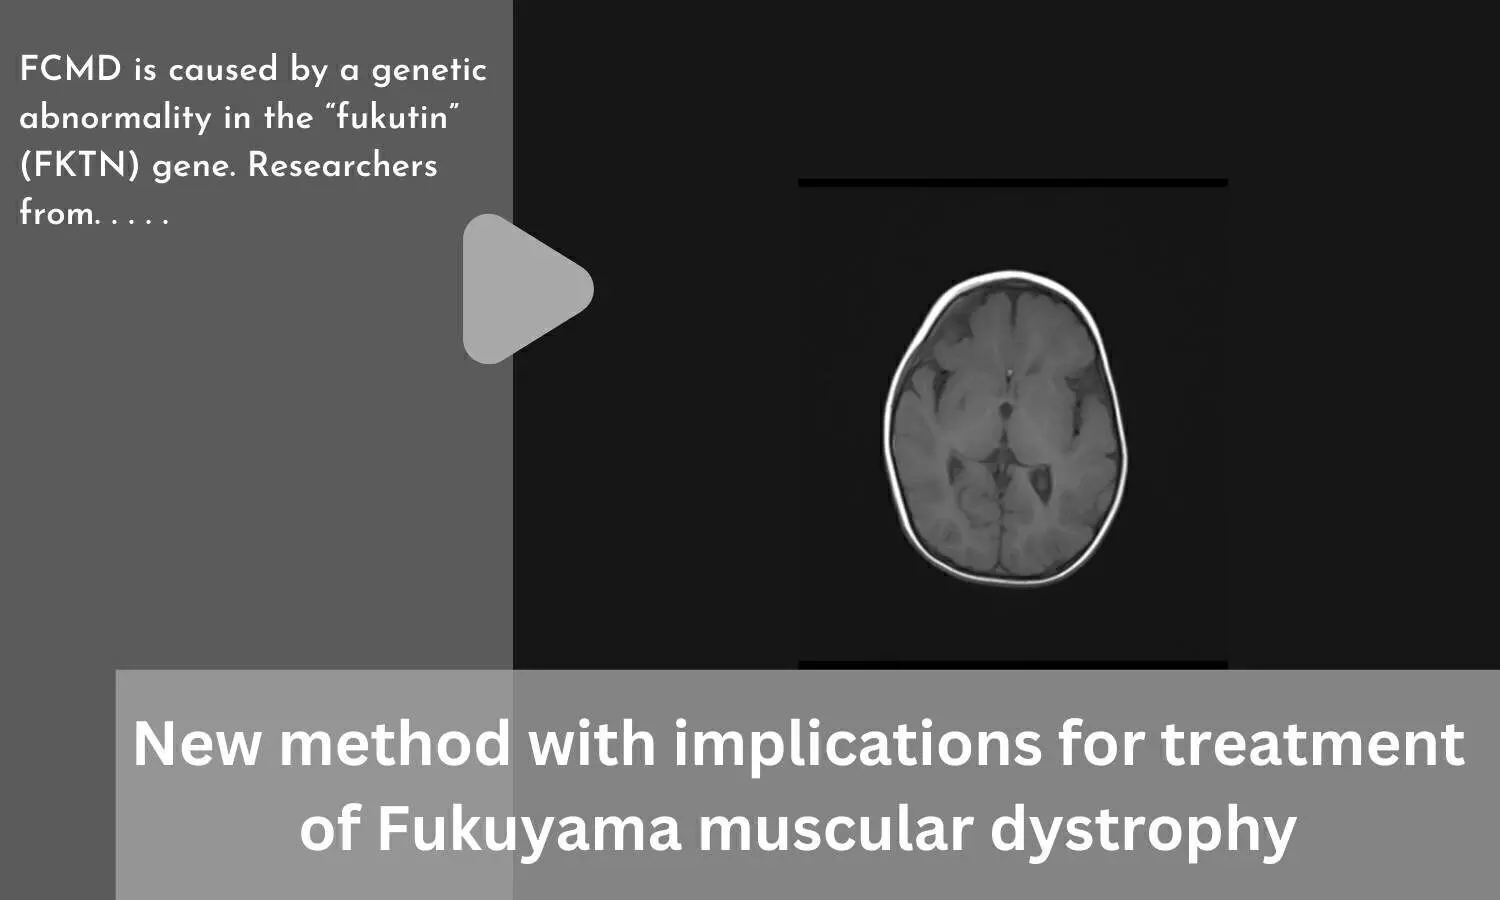 New method with implications for treatment of Fukuyama muscular dystrophy